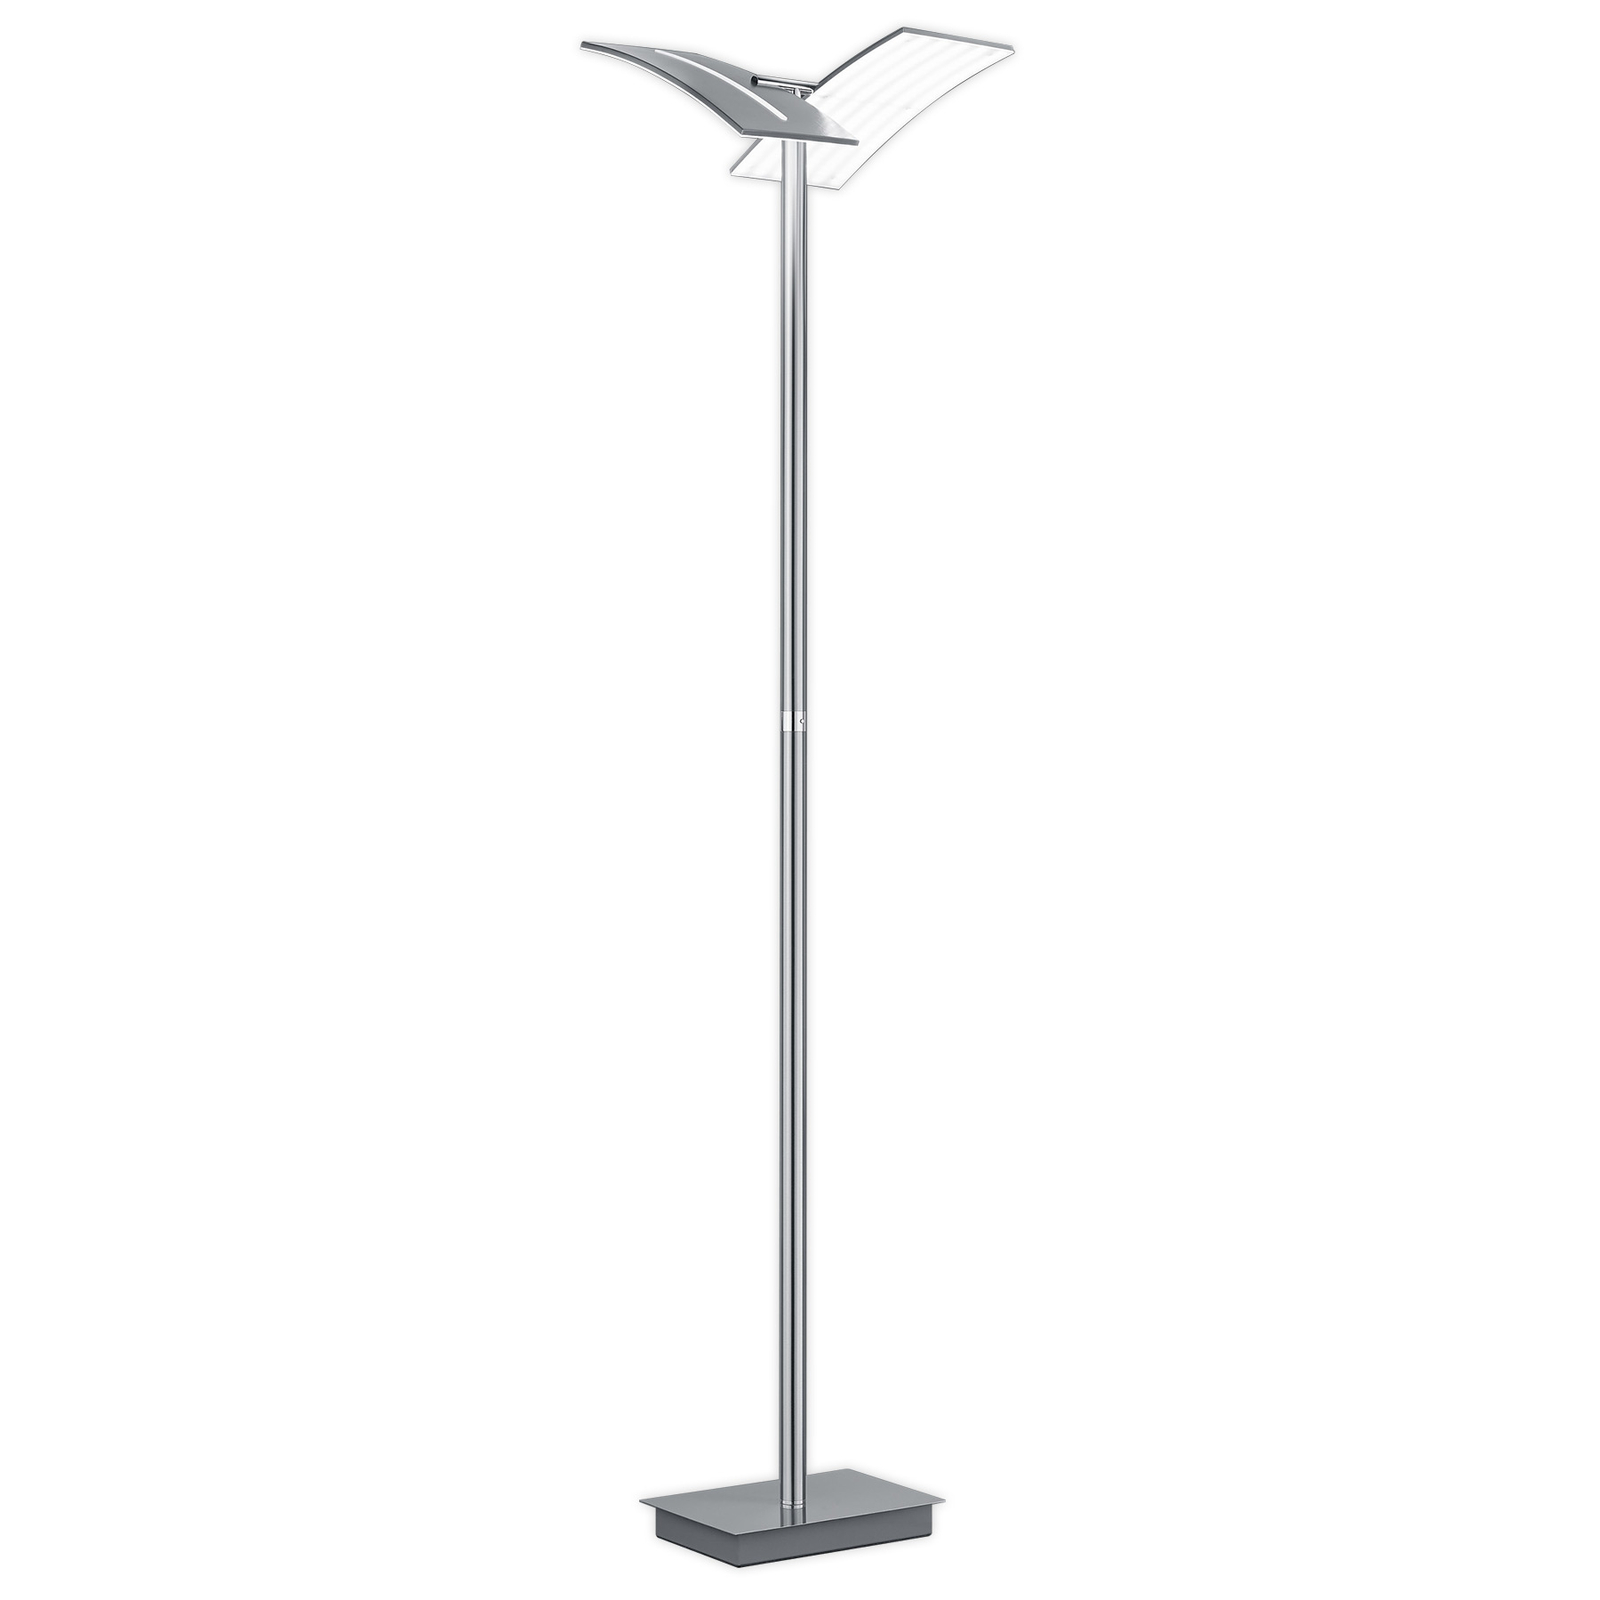 LED-Stehleuchte Dual CCT, dimmbar, nickel